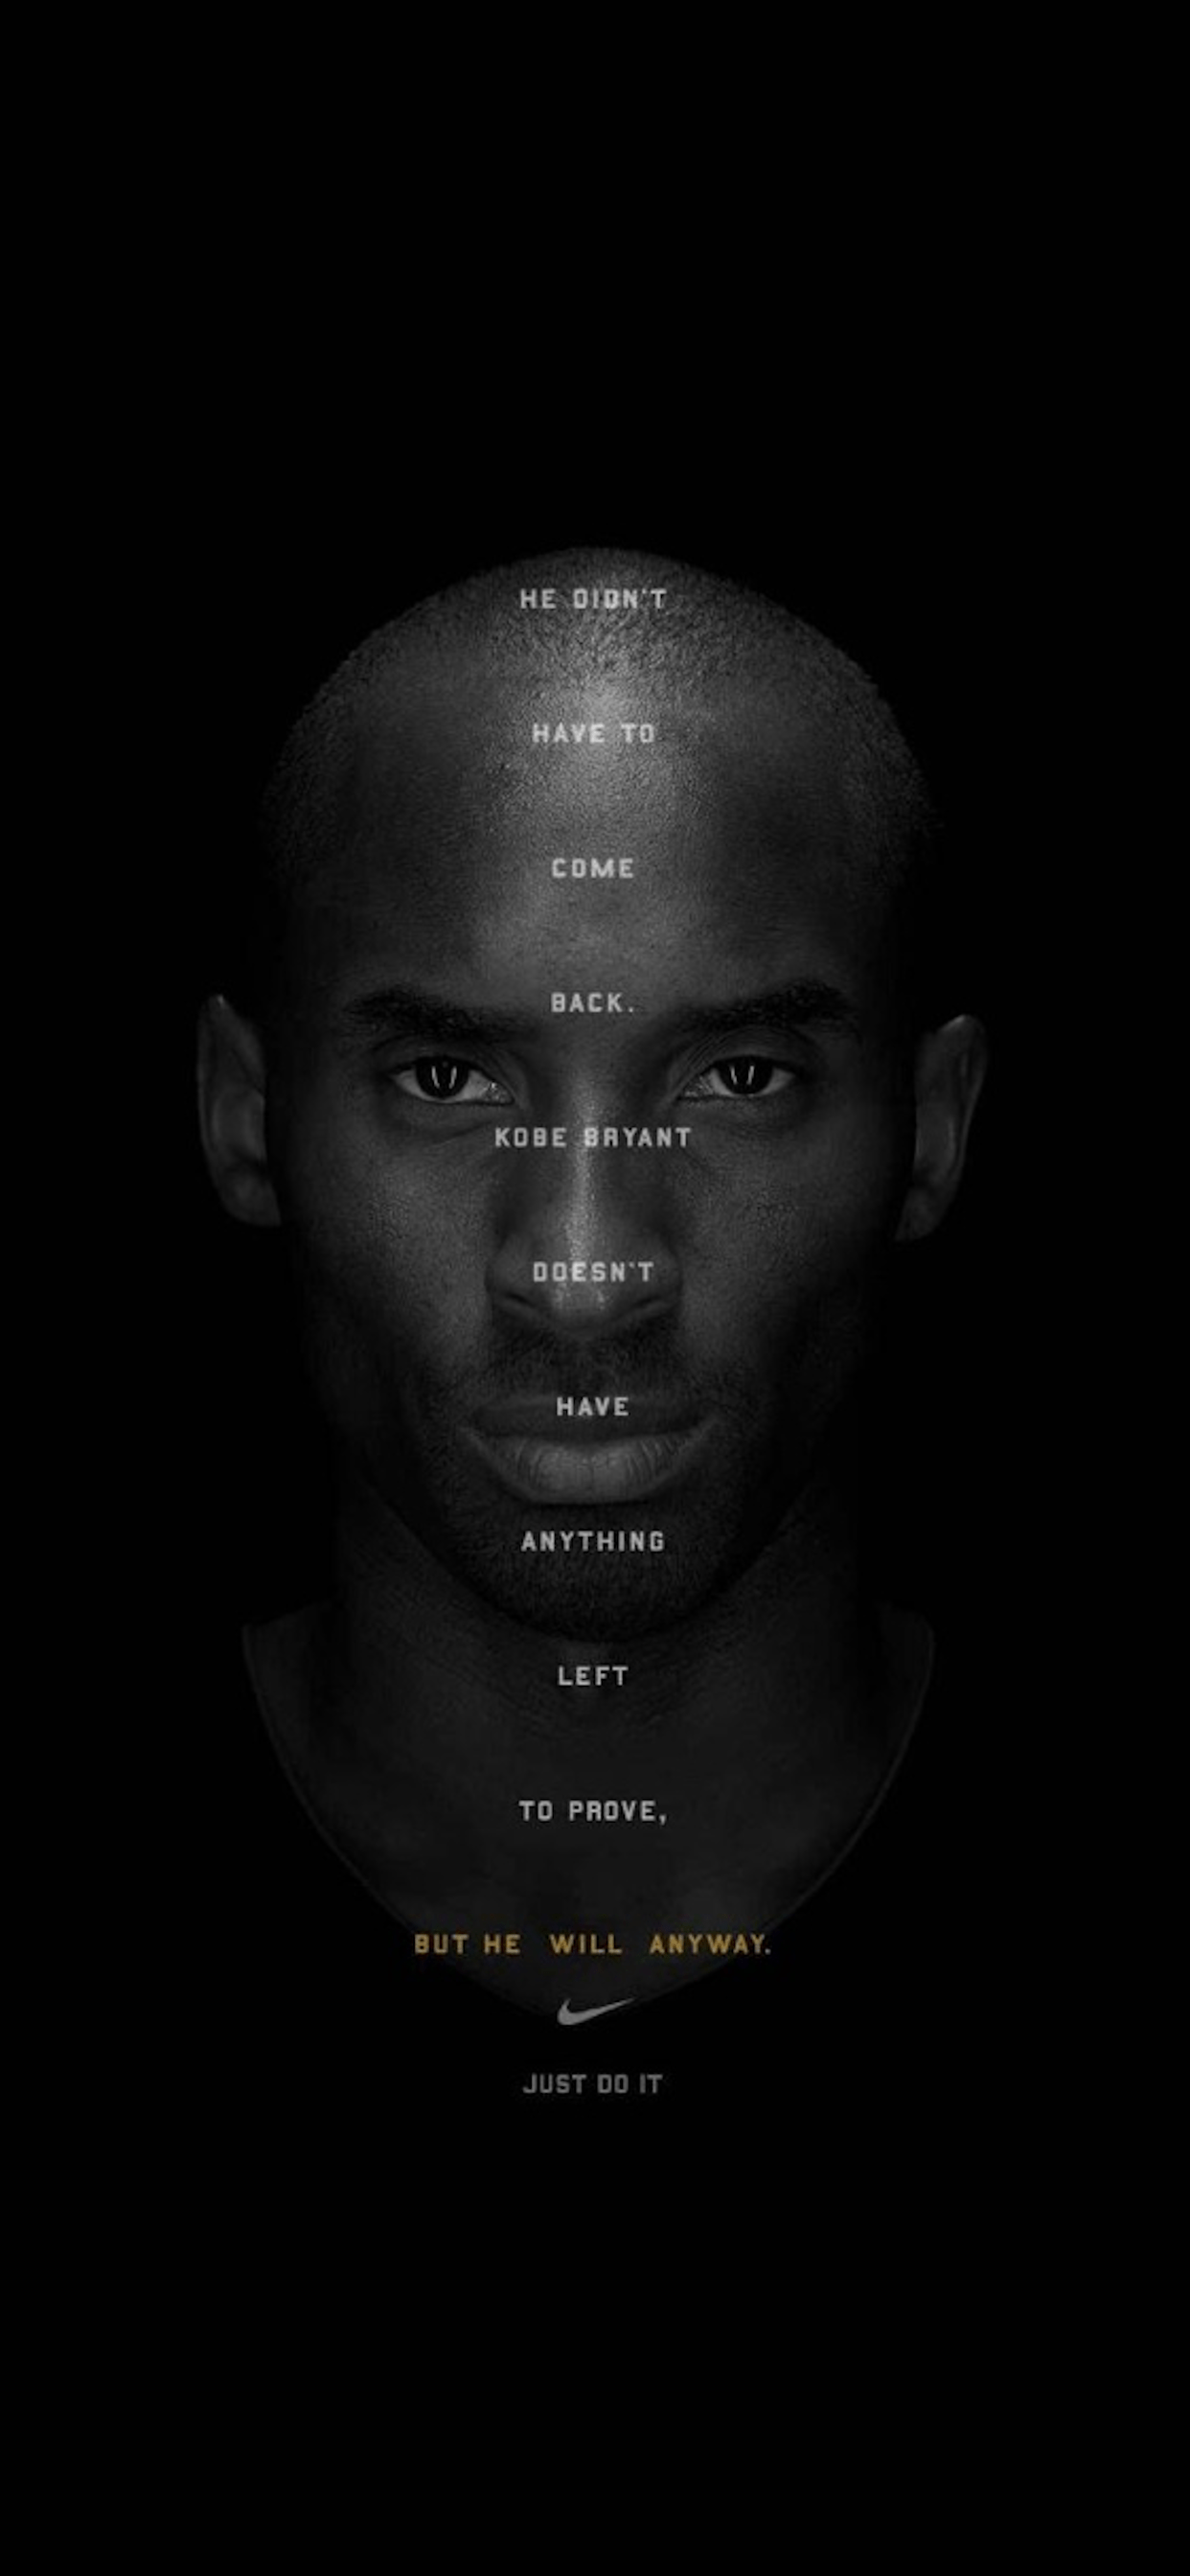 Kobe Byant Wallpapers for iPhone 11, Pro Max, X, 8, 7, 6